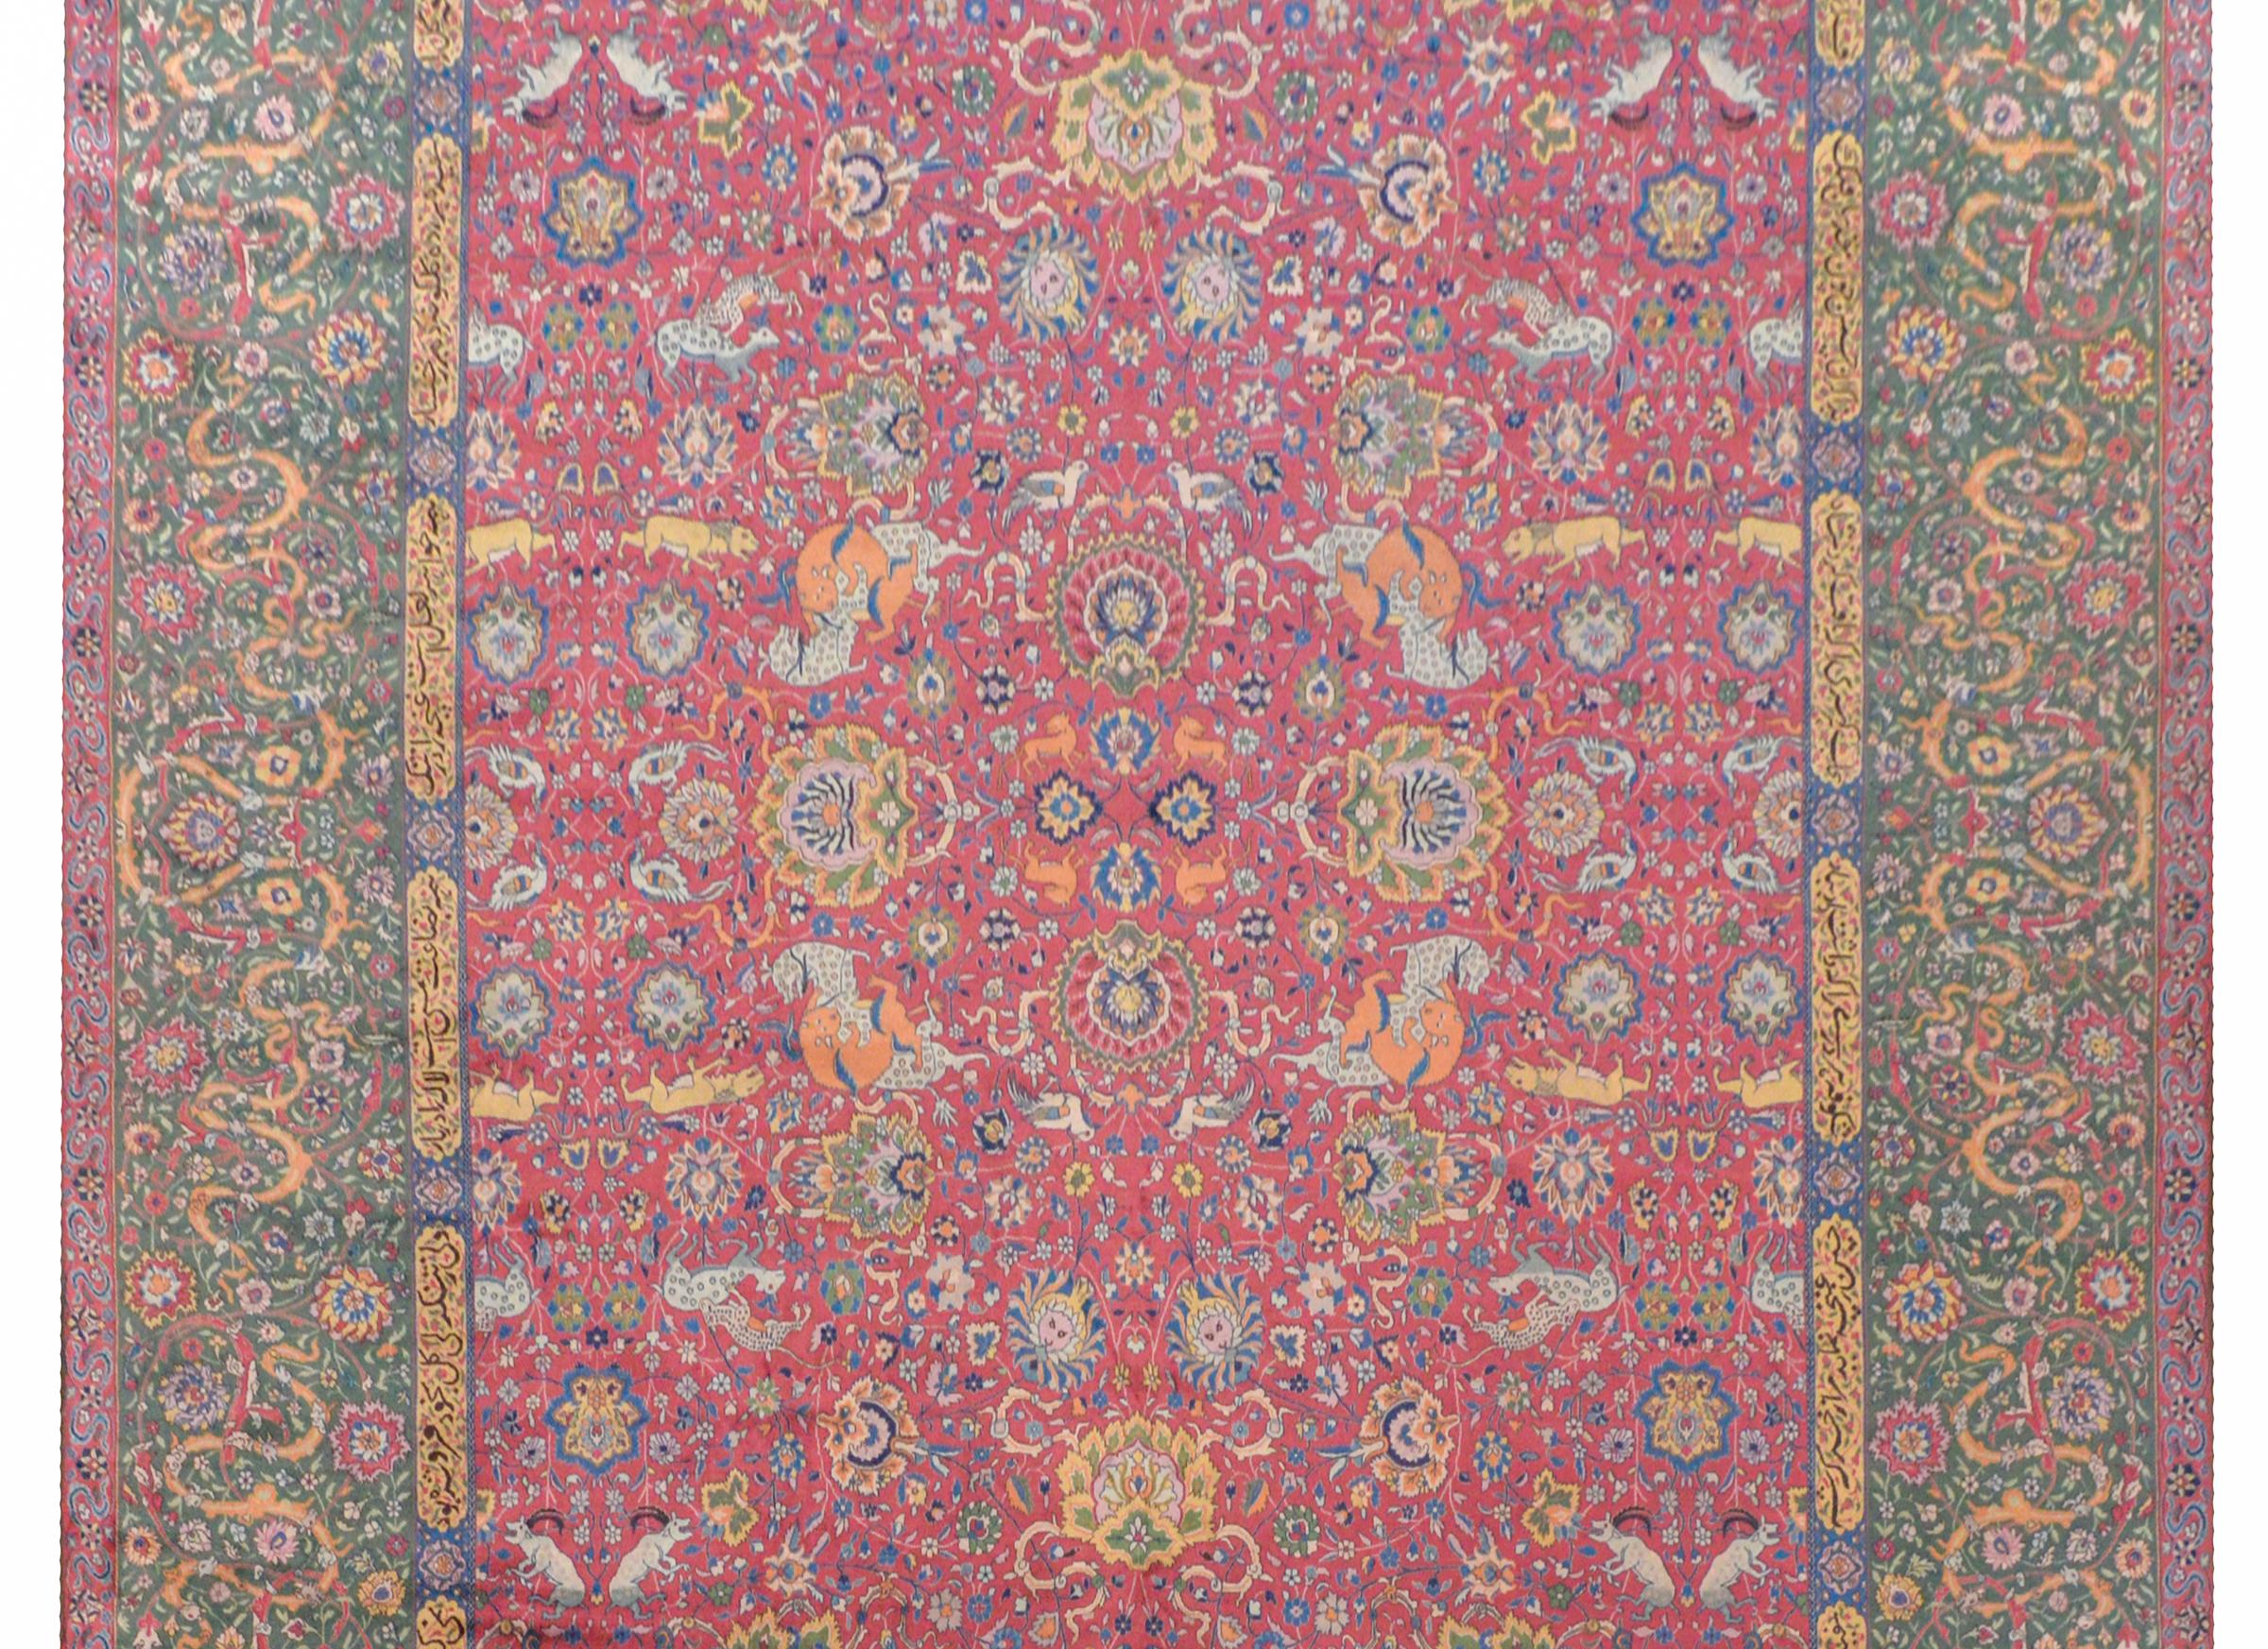 A wonderful and whimsical early 20th century Indian Agra rug with an all-over pattern of large-scale flowers and scrolling vines, and myriad animals including birds, lions, leopards and lions hunting deer, and antelope, all woven in myriad colors on